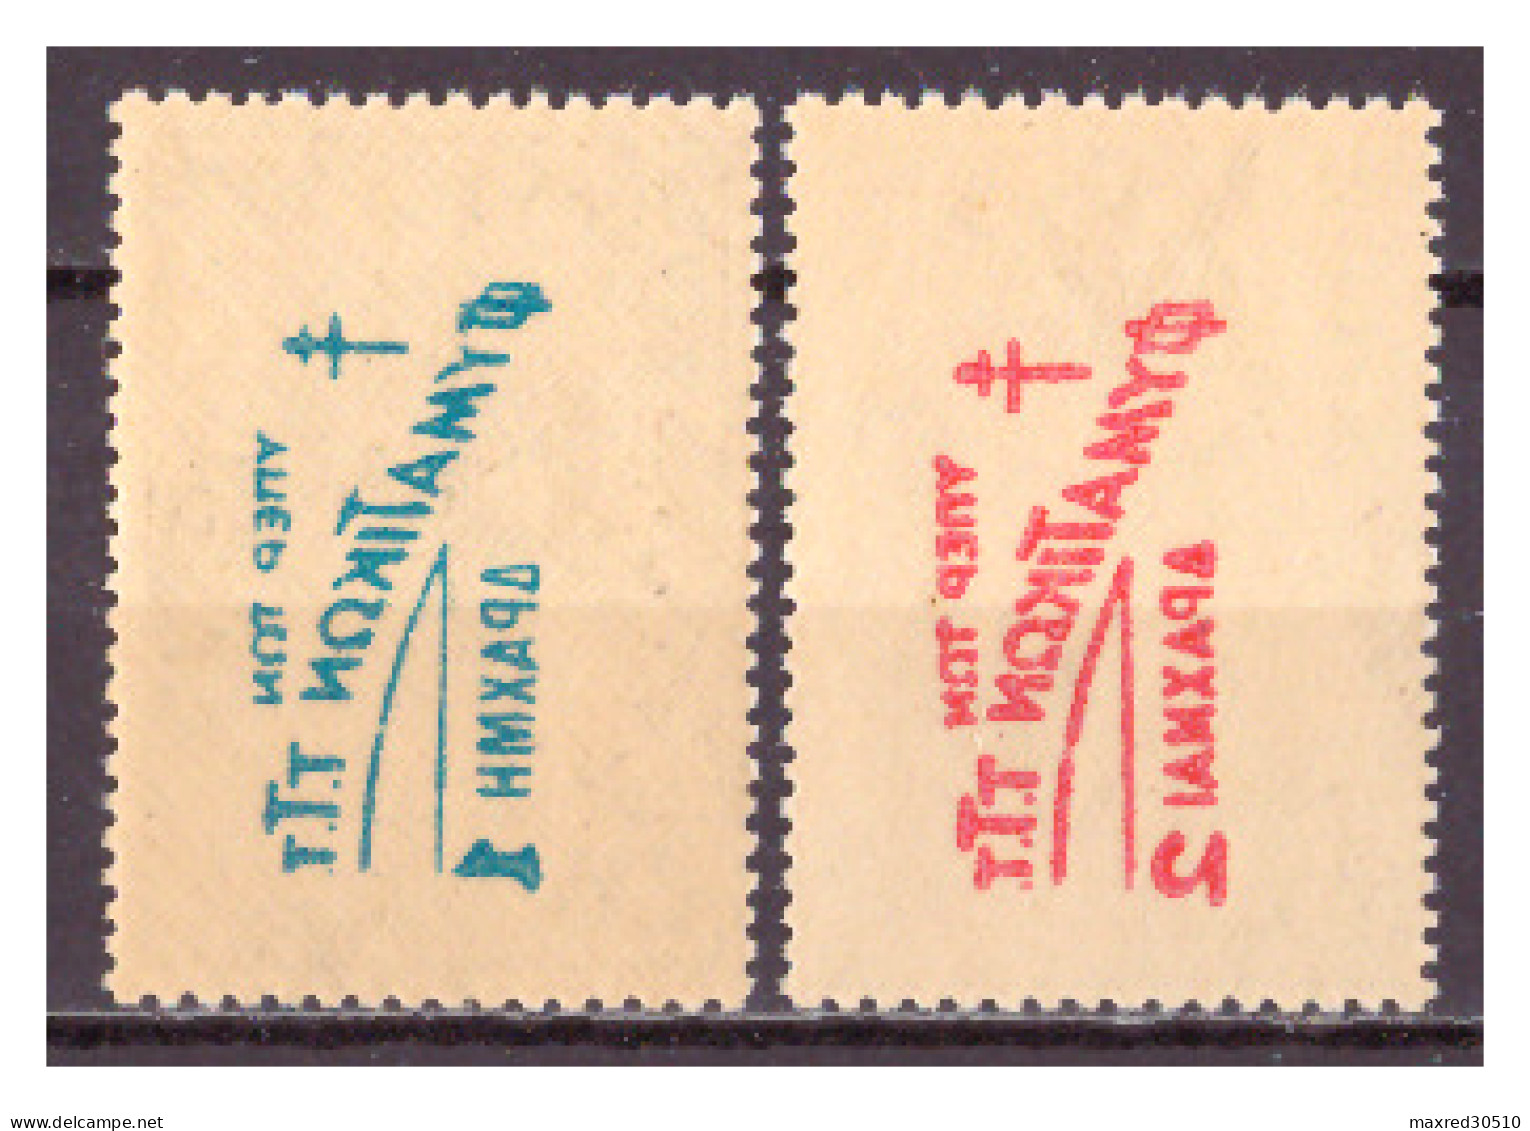 GREECE 1945 CHARITY SET "1937 STAMPS WITH OVERPRINT" WITH MIRROR PRINTING AT THE GUM ERROR MNH - Variedades Y Curiosidades